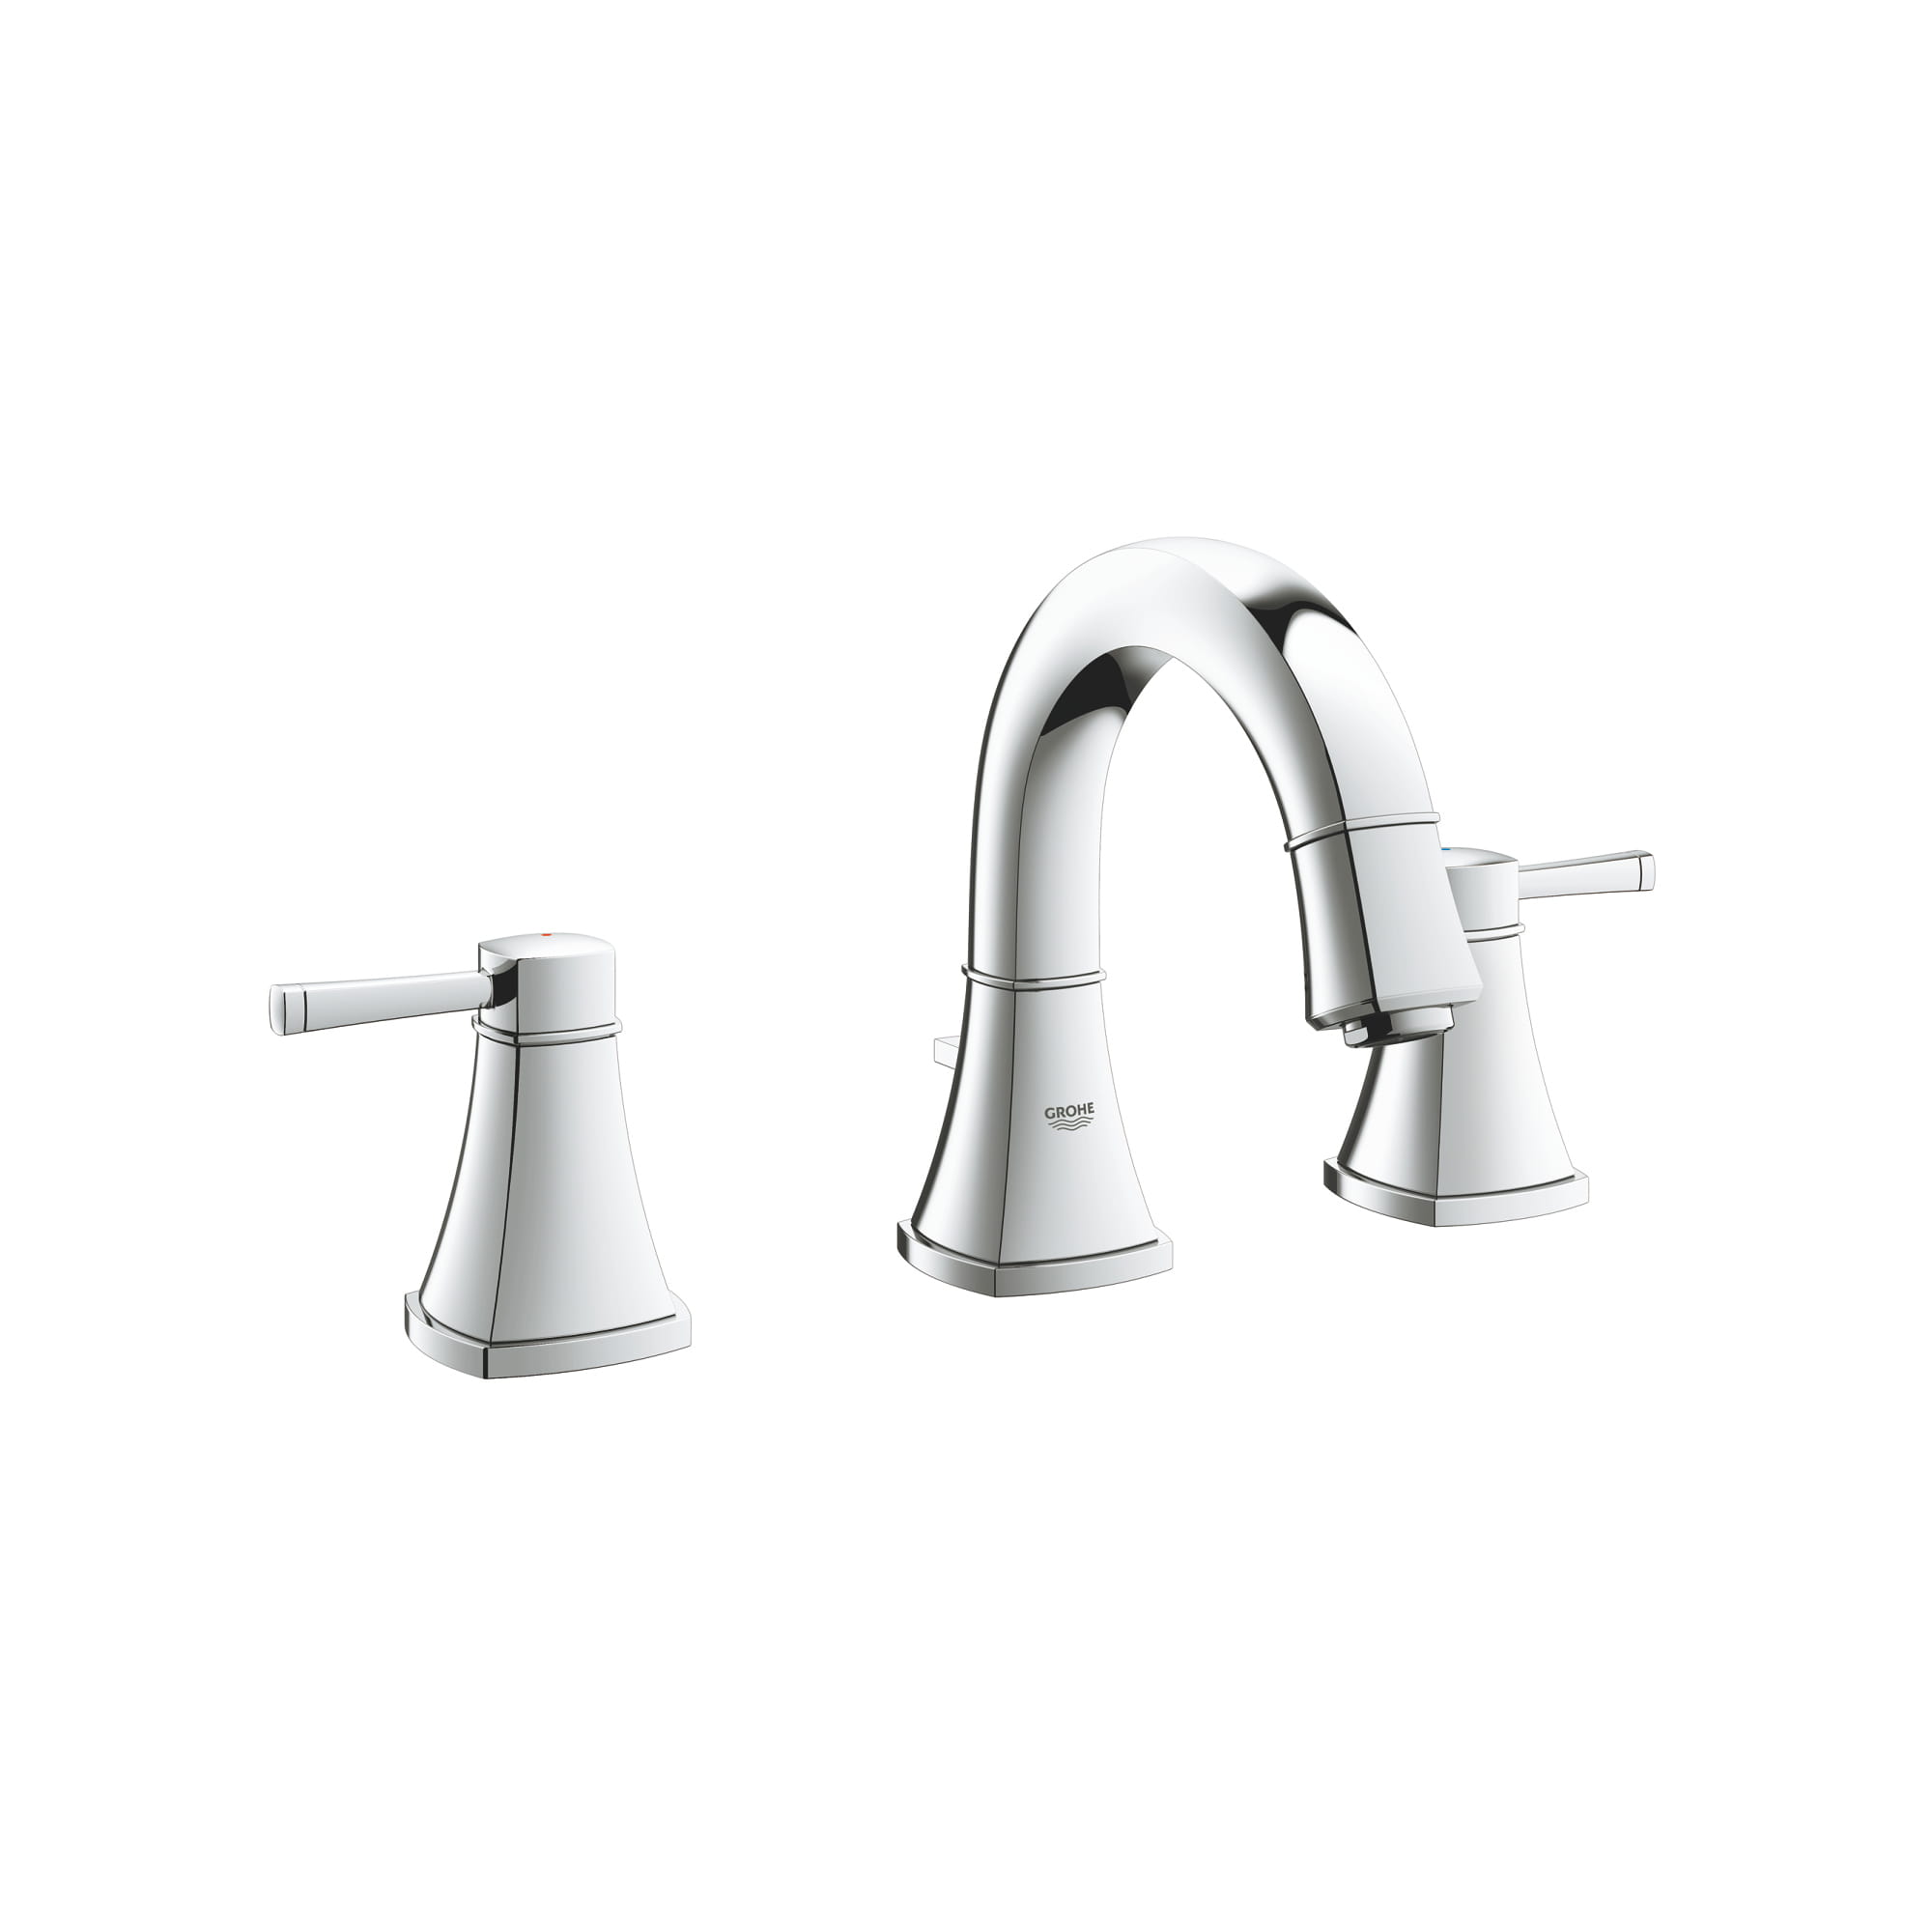 Allure in. Widespread 2-Handle Bathroom Faucet with Lever Handles 1.2  GPM 並行輸入品 通販